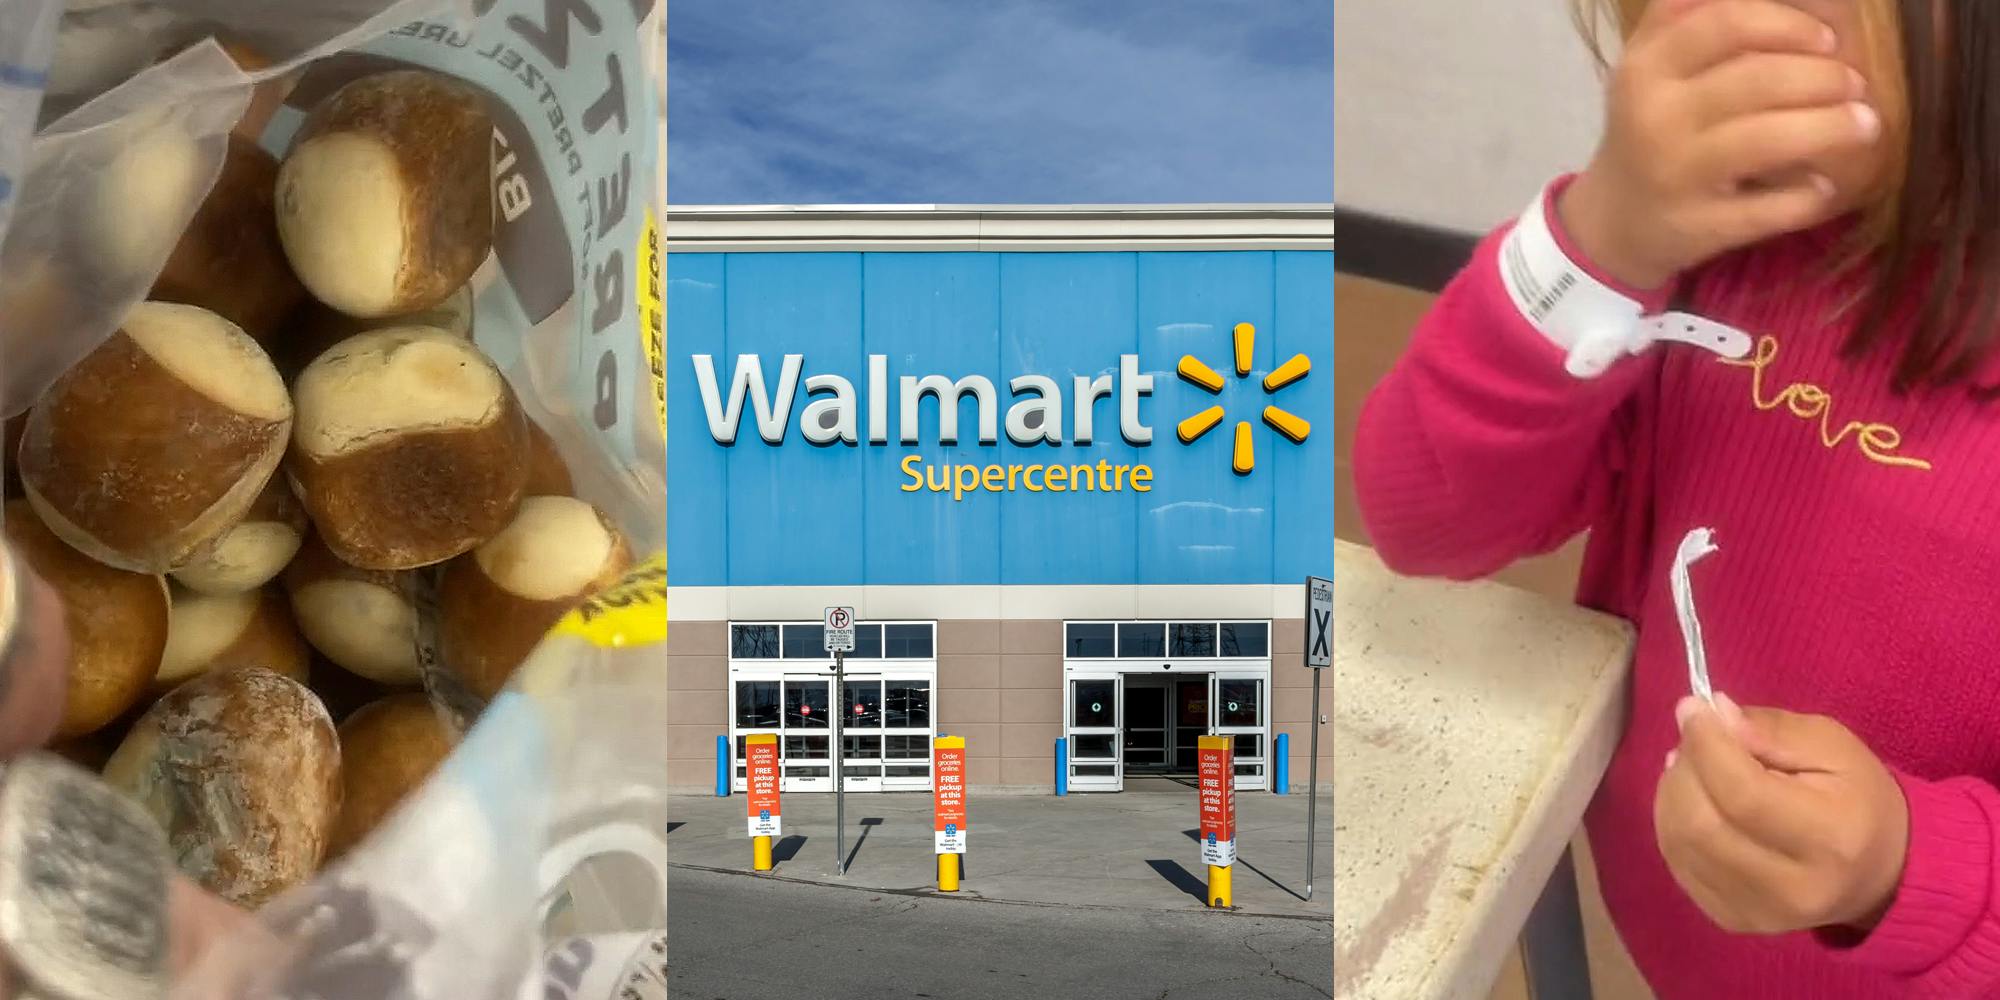 Walmart pretzel bag full of moldy expired pretzels (l) Walmart building with sign and sky (c) child with hospital band on wrist at Walmart returns (r)